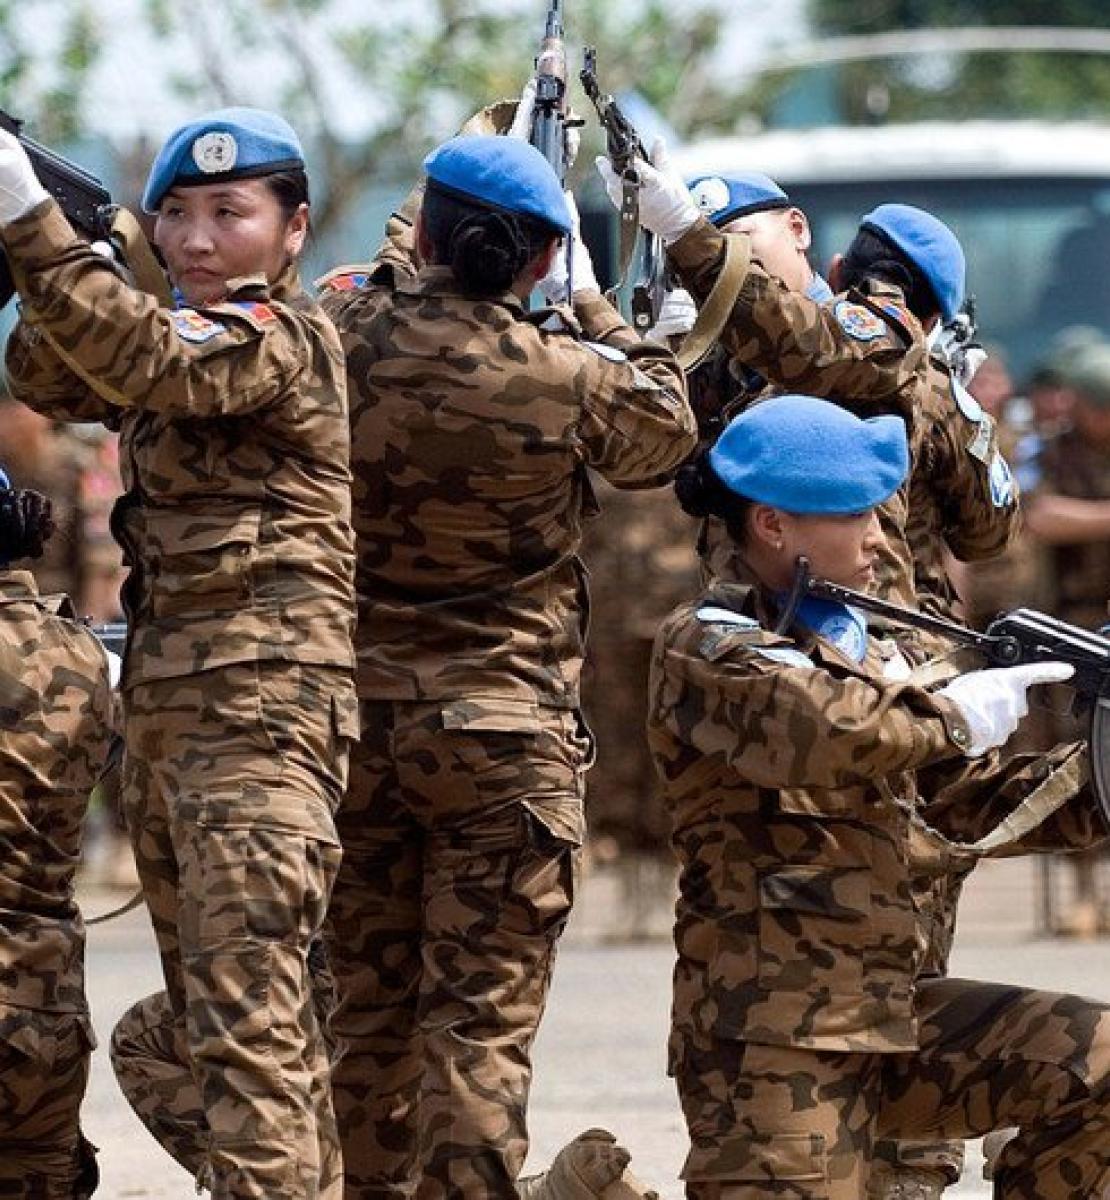 Mongolian peacekeepers serving in a guard unit assigned to protect the Special Court for Sierra Leone perform a tactical exercise.